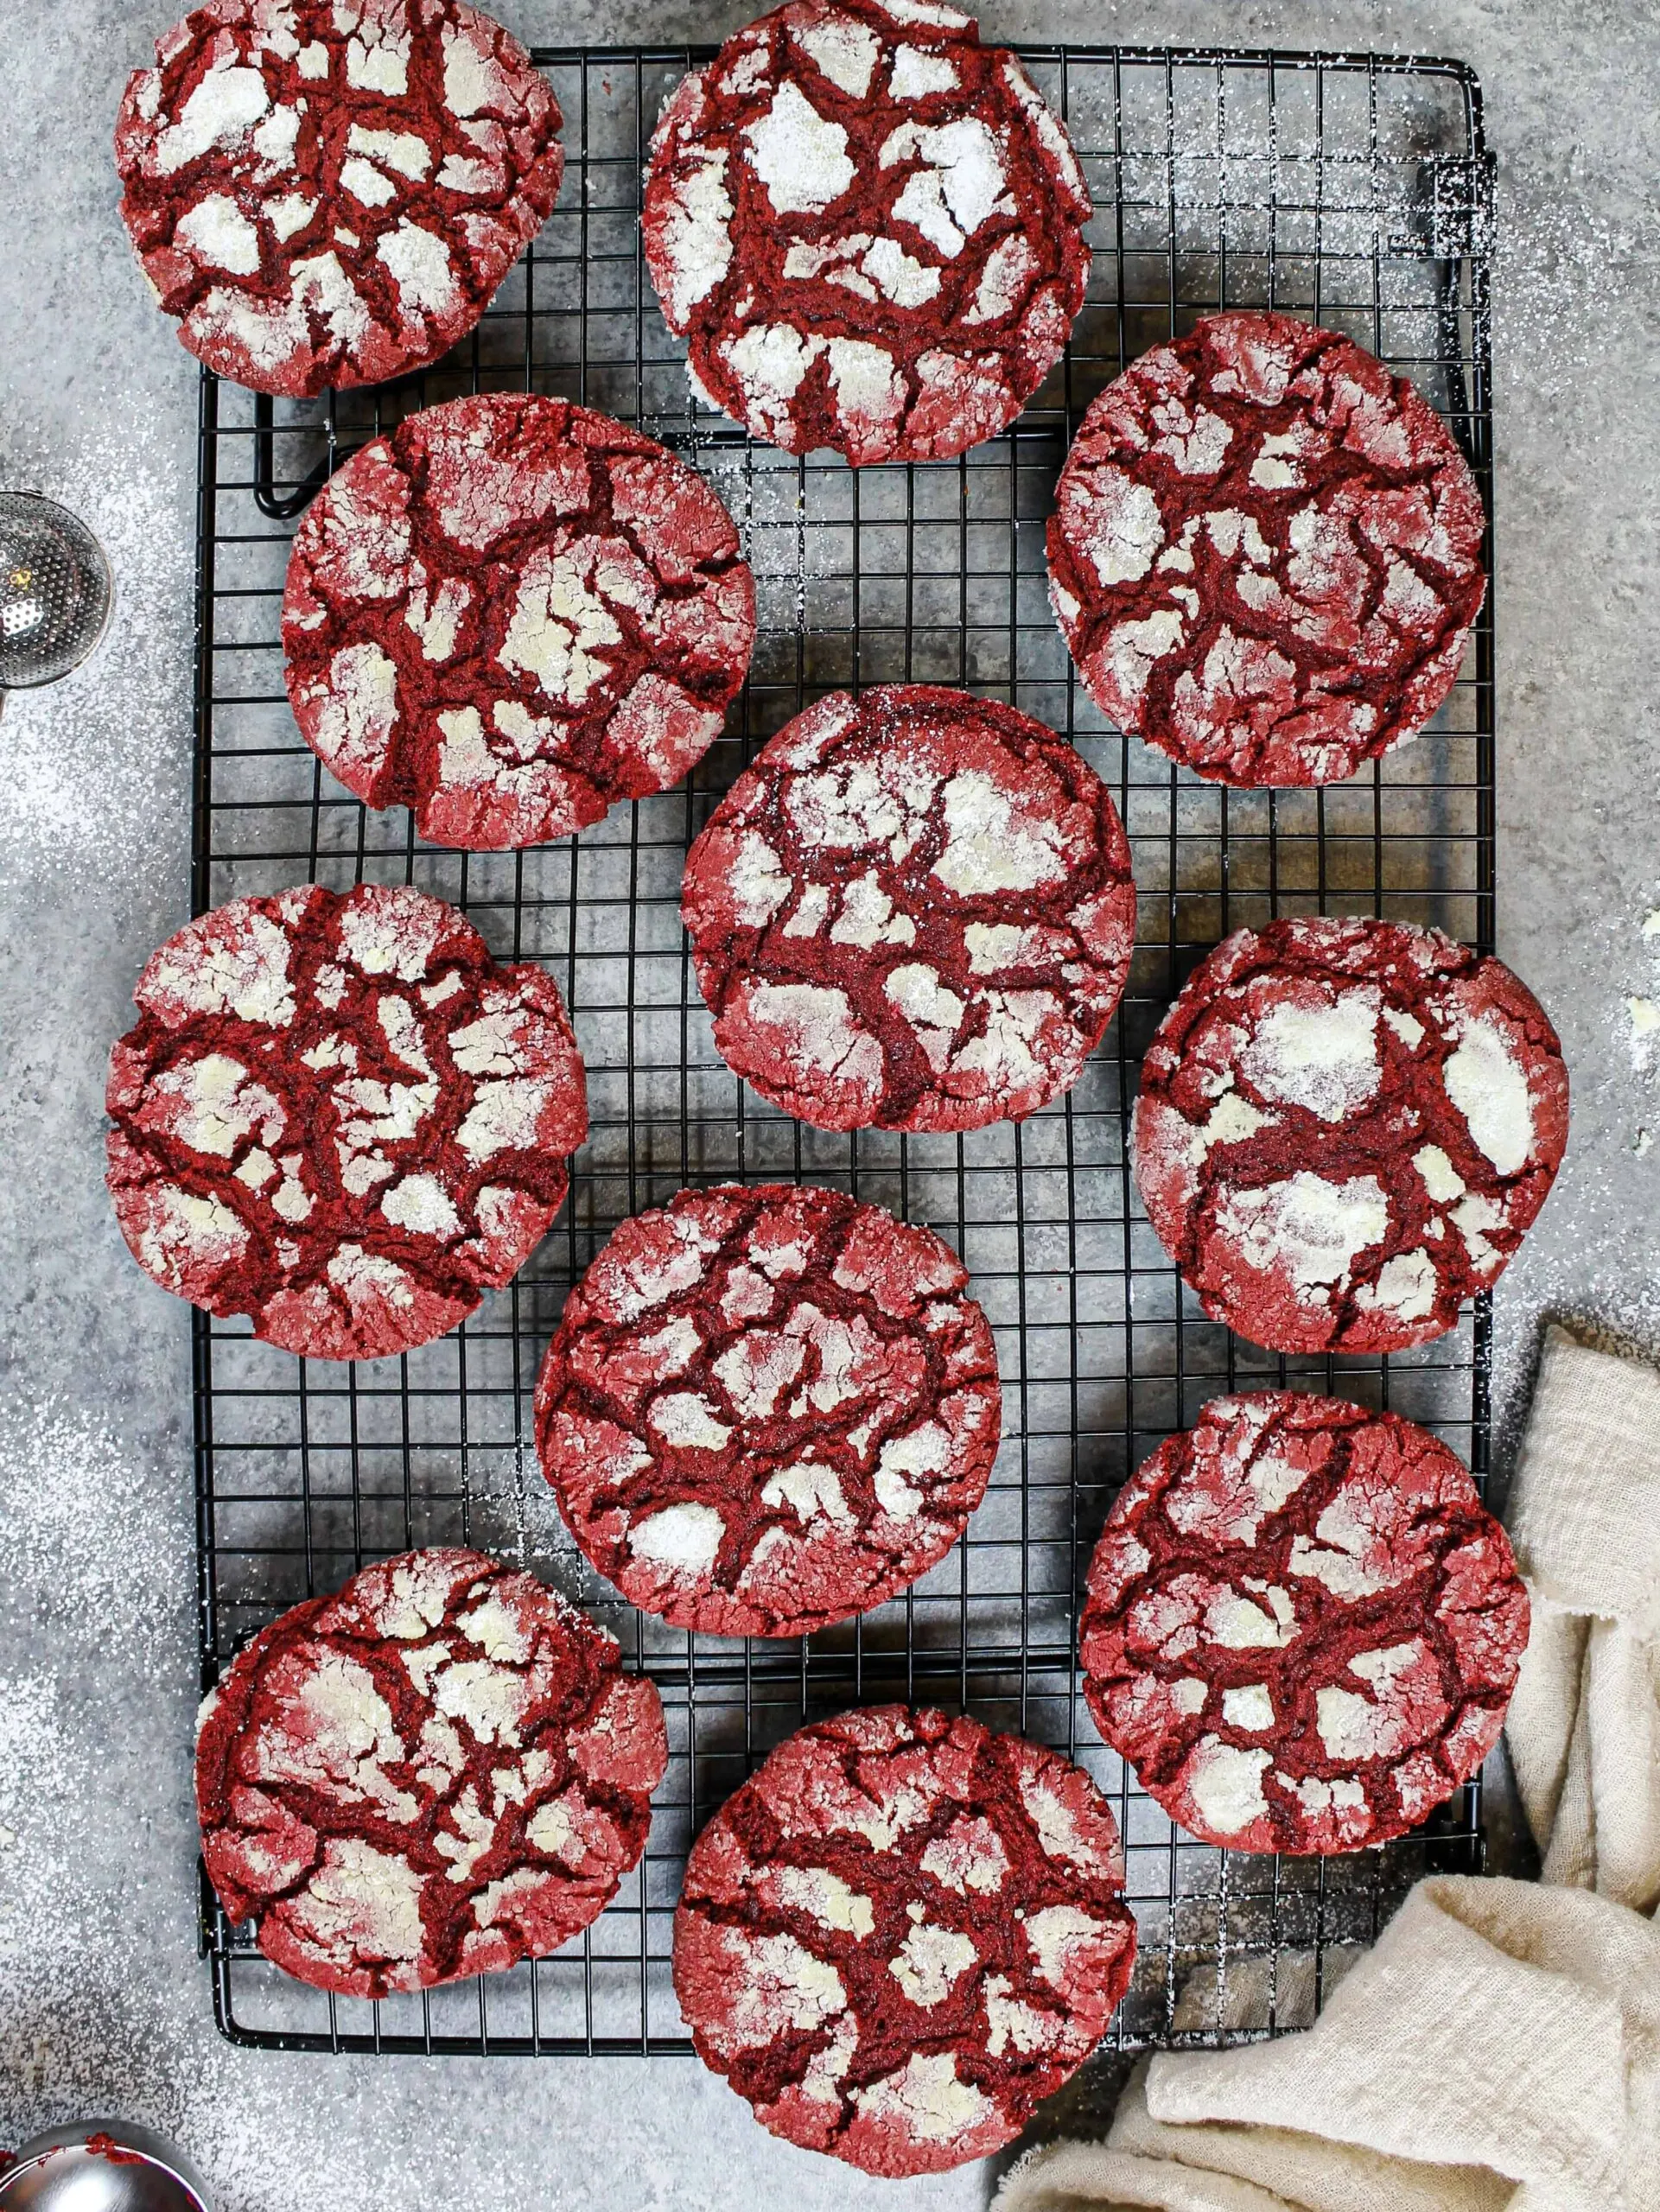 image of red velvet crinkle cookies made from scratch cooling on a wire rack